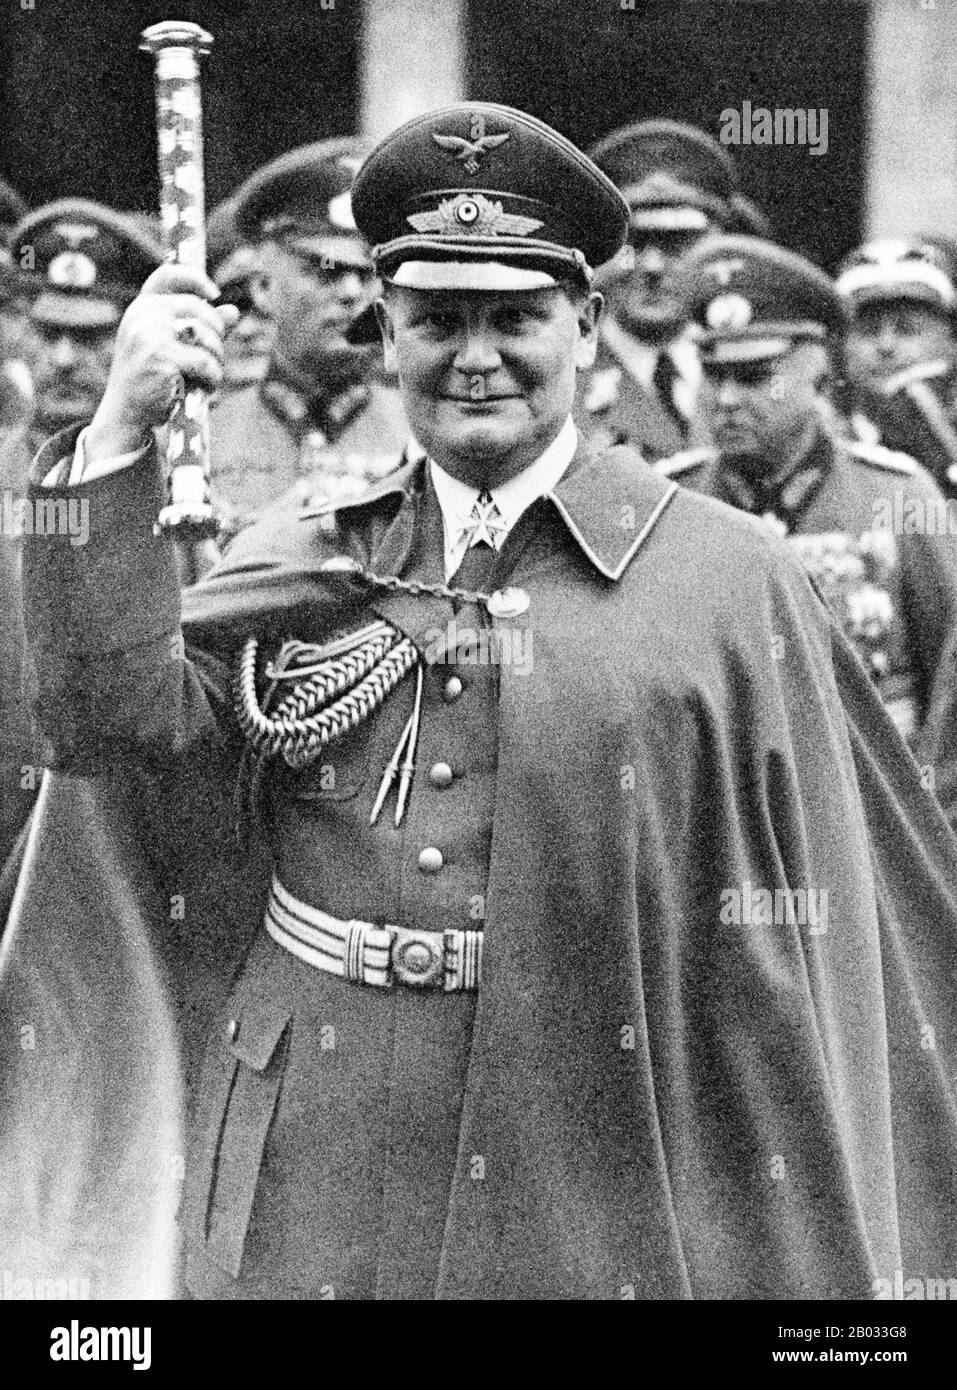 Hermann Wilhelm Goering (12 January 1893 – 15 October 1946) was a German politician, military leader, and leading member of the Nazi Party (NSDAP).  After helping Adolf Hitler take power in 1933, he became the second-most powerful man in Germany. He founded the Gestapo in 1933, and later gave command of it to Heinrich Himmler. Göring was appointed commander-in-chief of the Luftwaffe (air force) in 1935, a position he held until the final days of World War II.  After World War II, Göring was convicted of war crimes and crimes against humanity at the Nuremberg trials. He was sentenced to death b Stock Photo